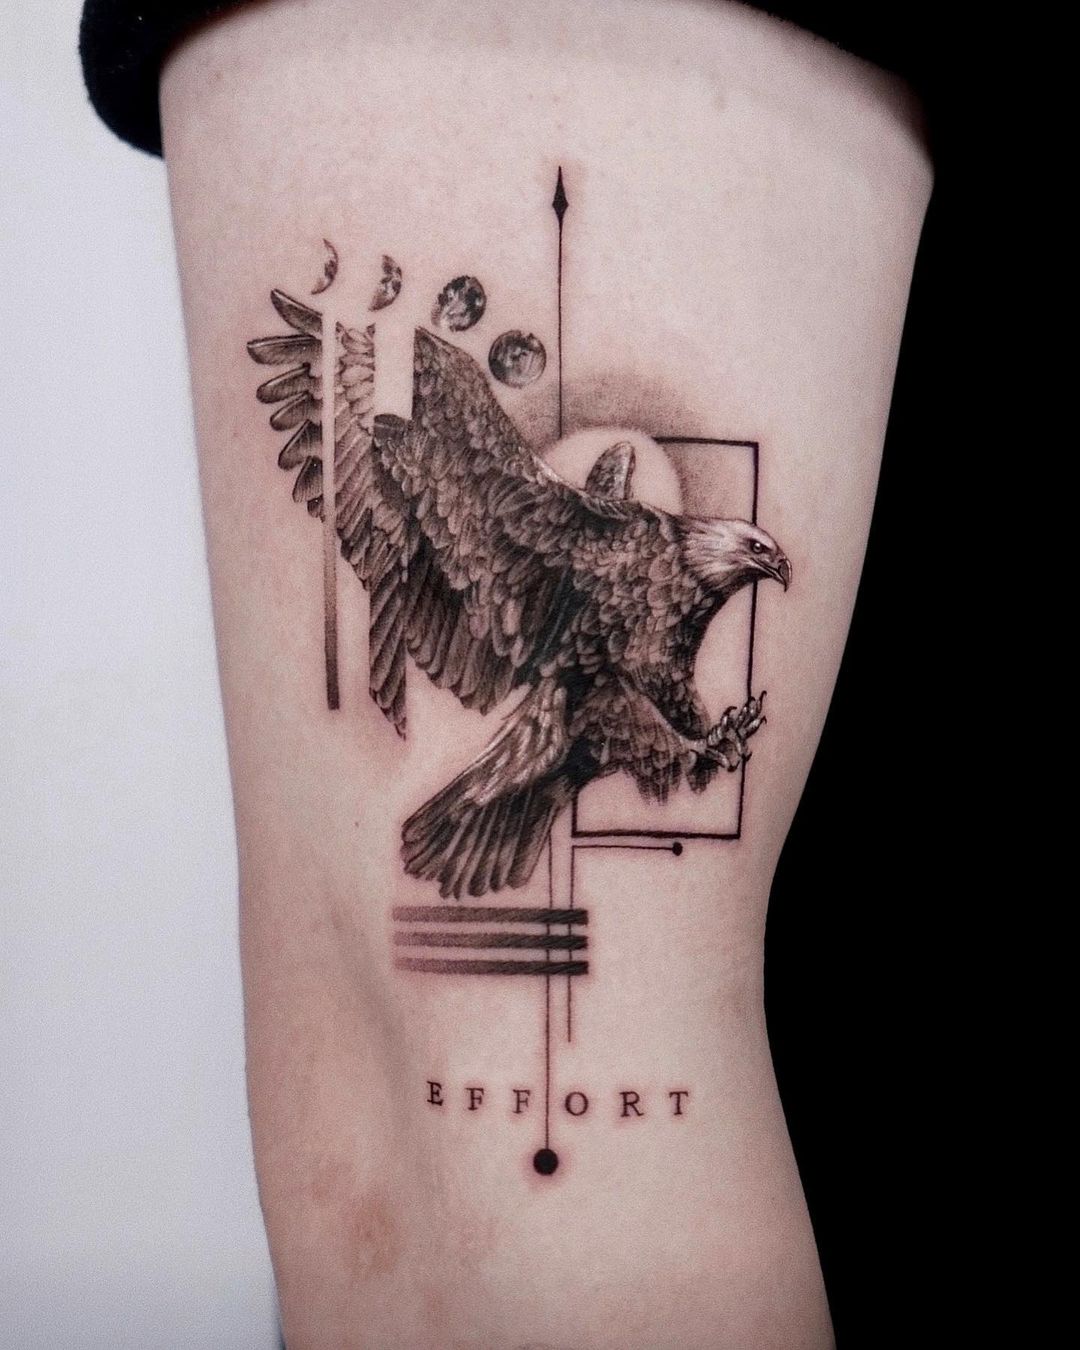 20+ Powerful Eagle Tattoo Ideas To Try This Year! - Tikli